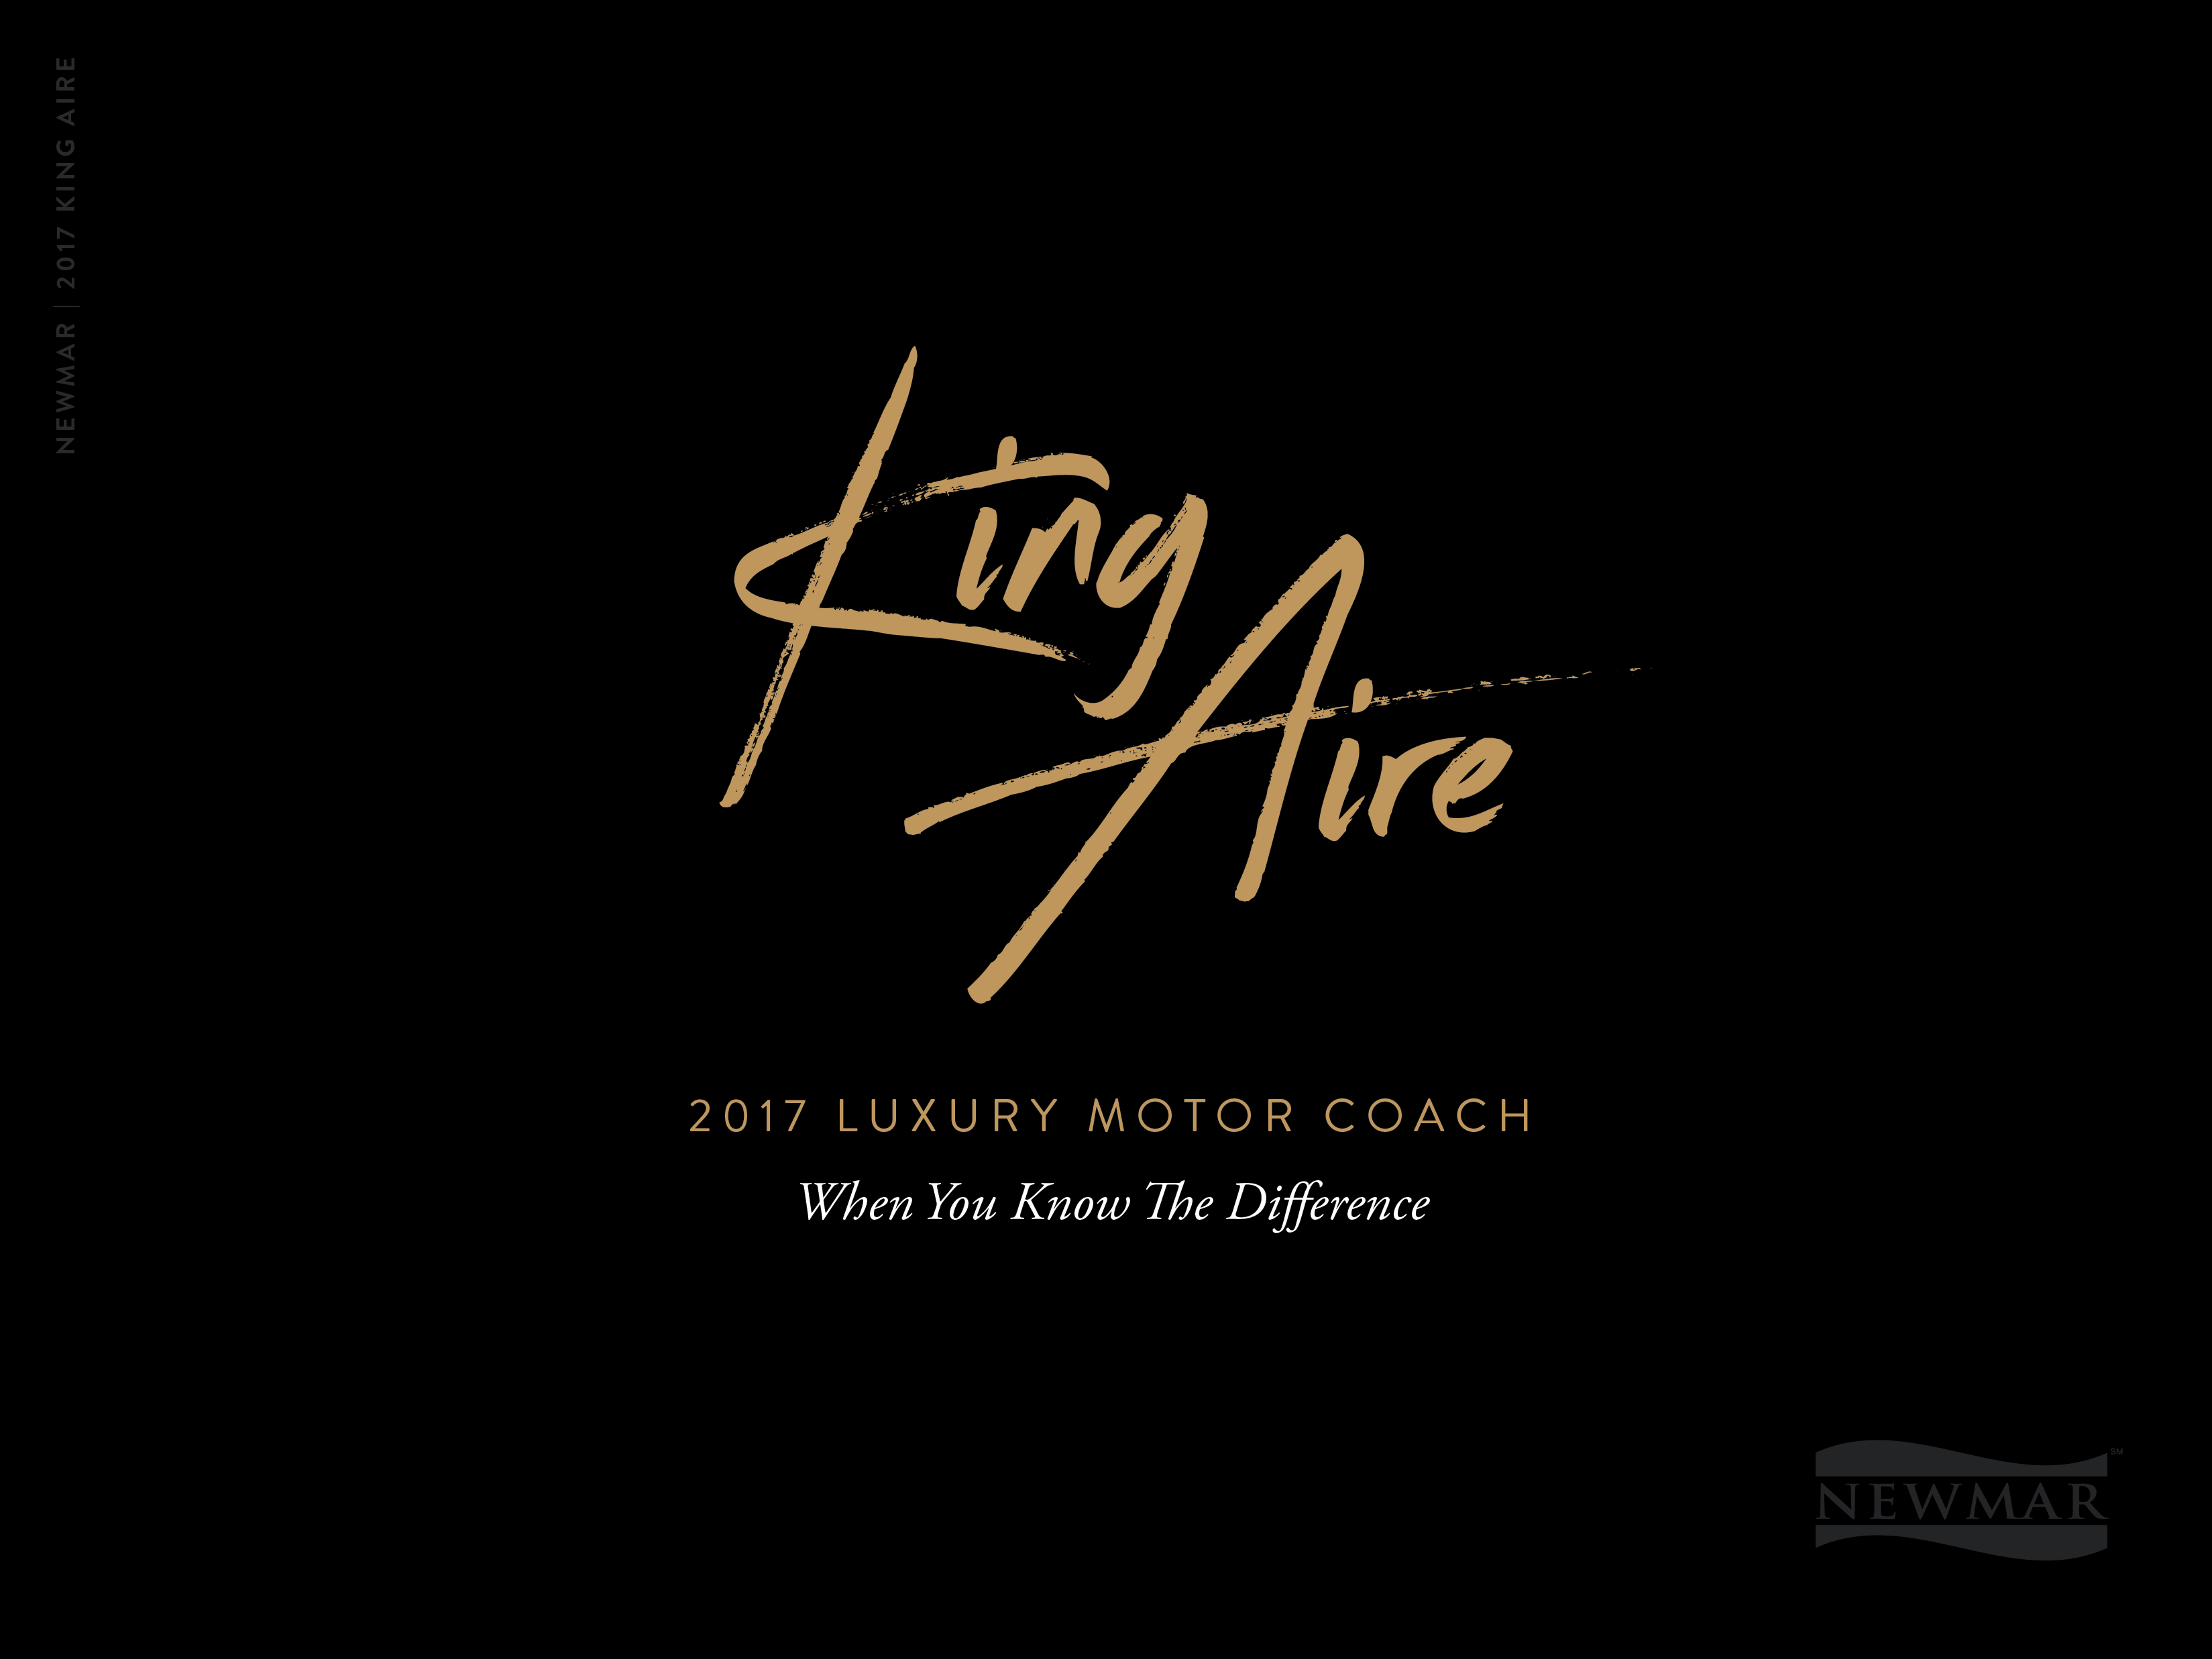 2017 King Aire